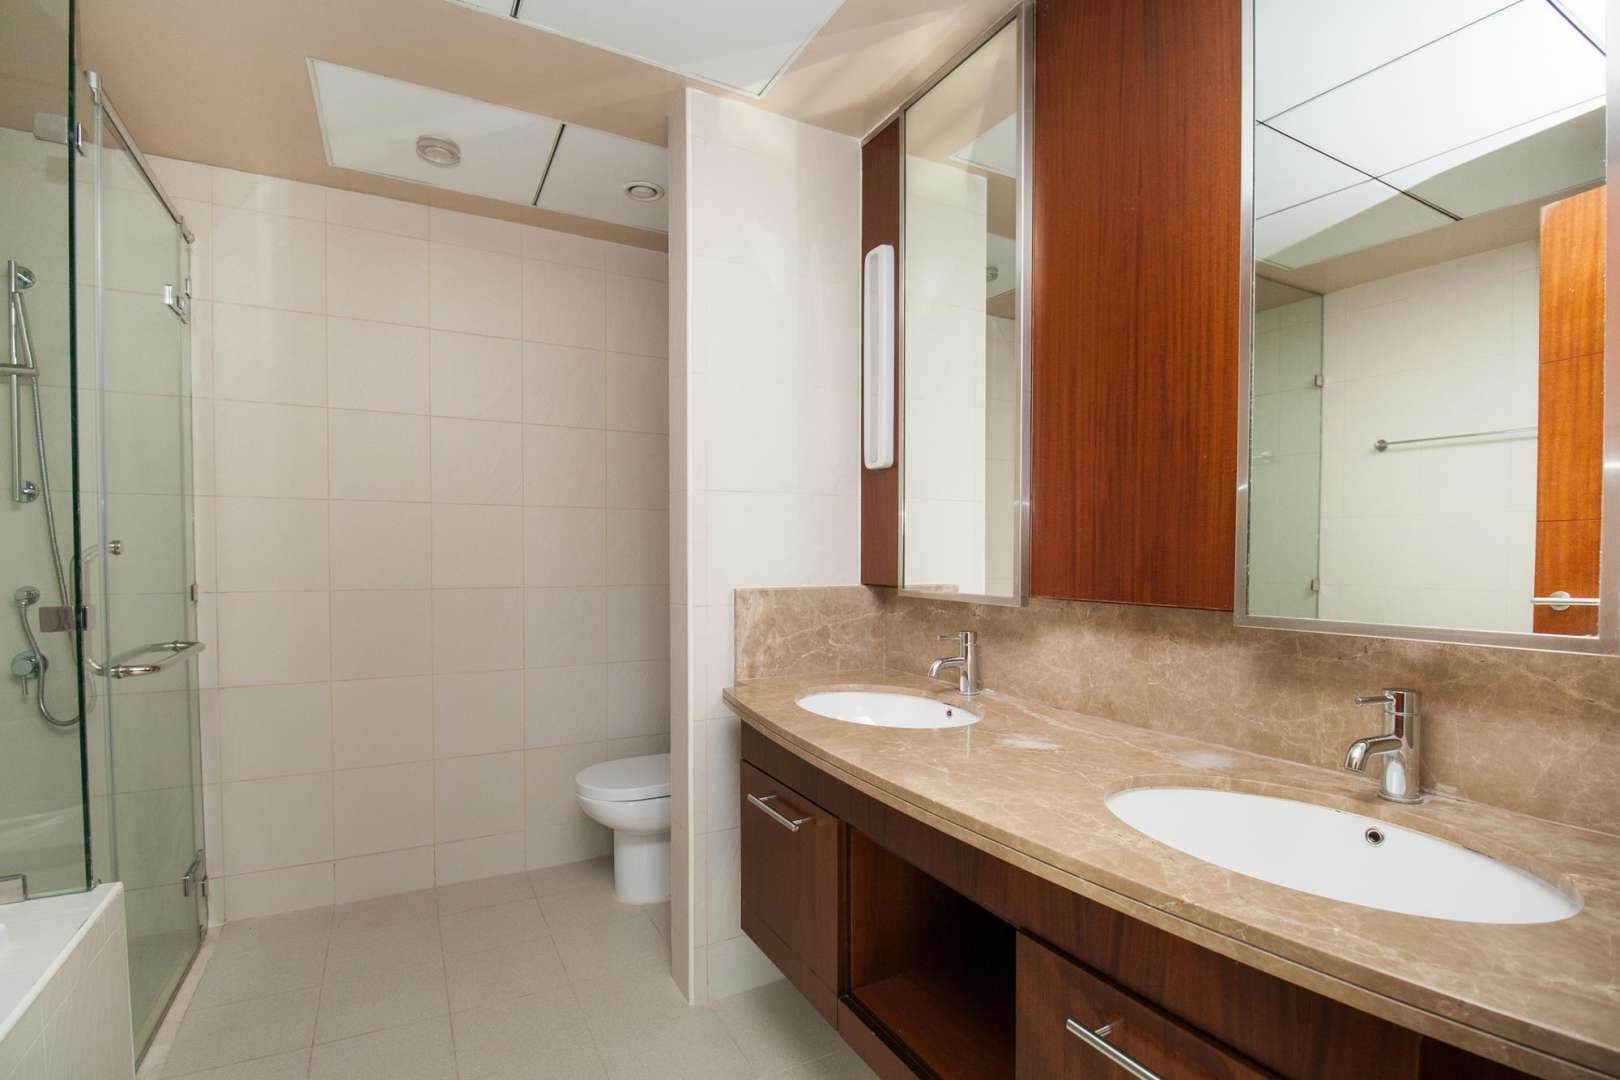 3 Bedroom Apartment For Rent Standpoint Tower A Lp05393 2d3a1bc169e89600.jpg